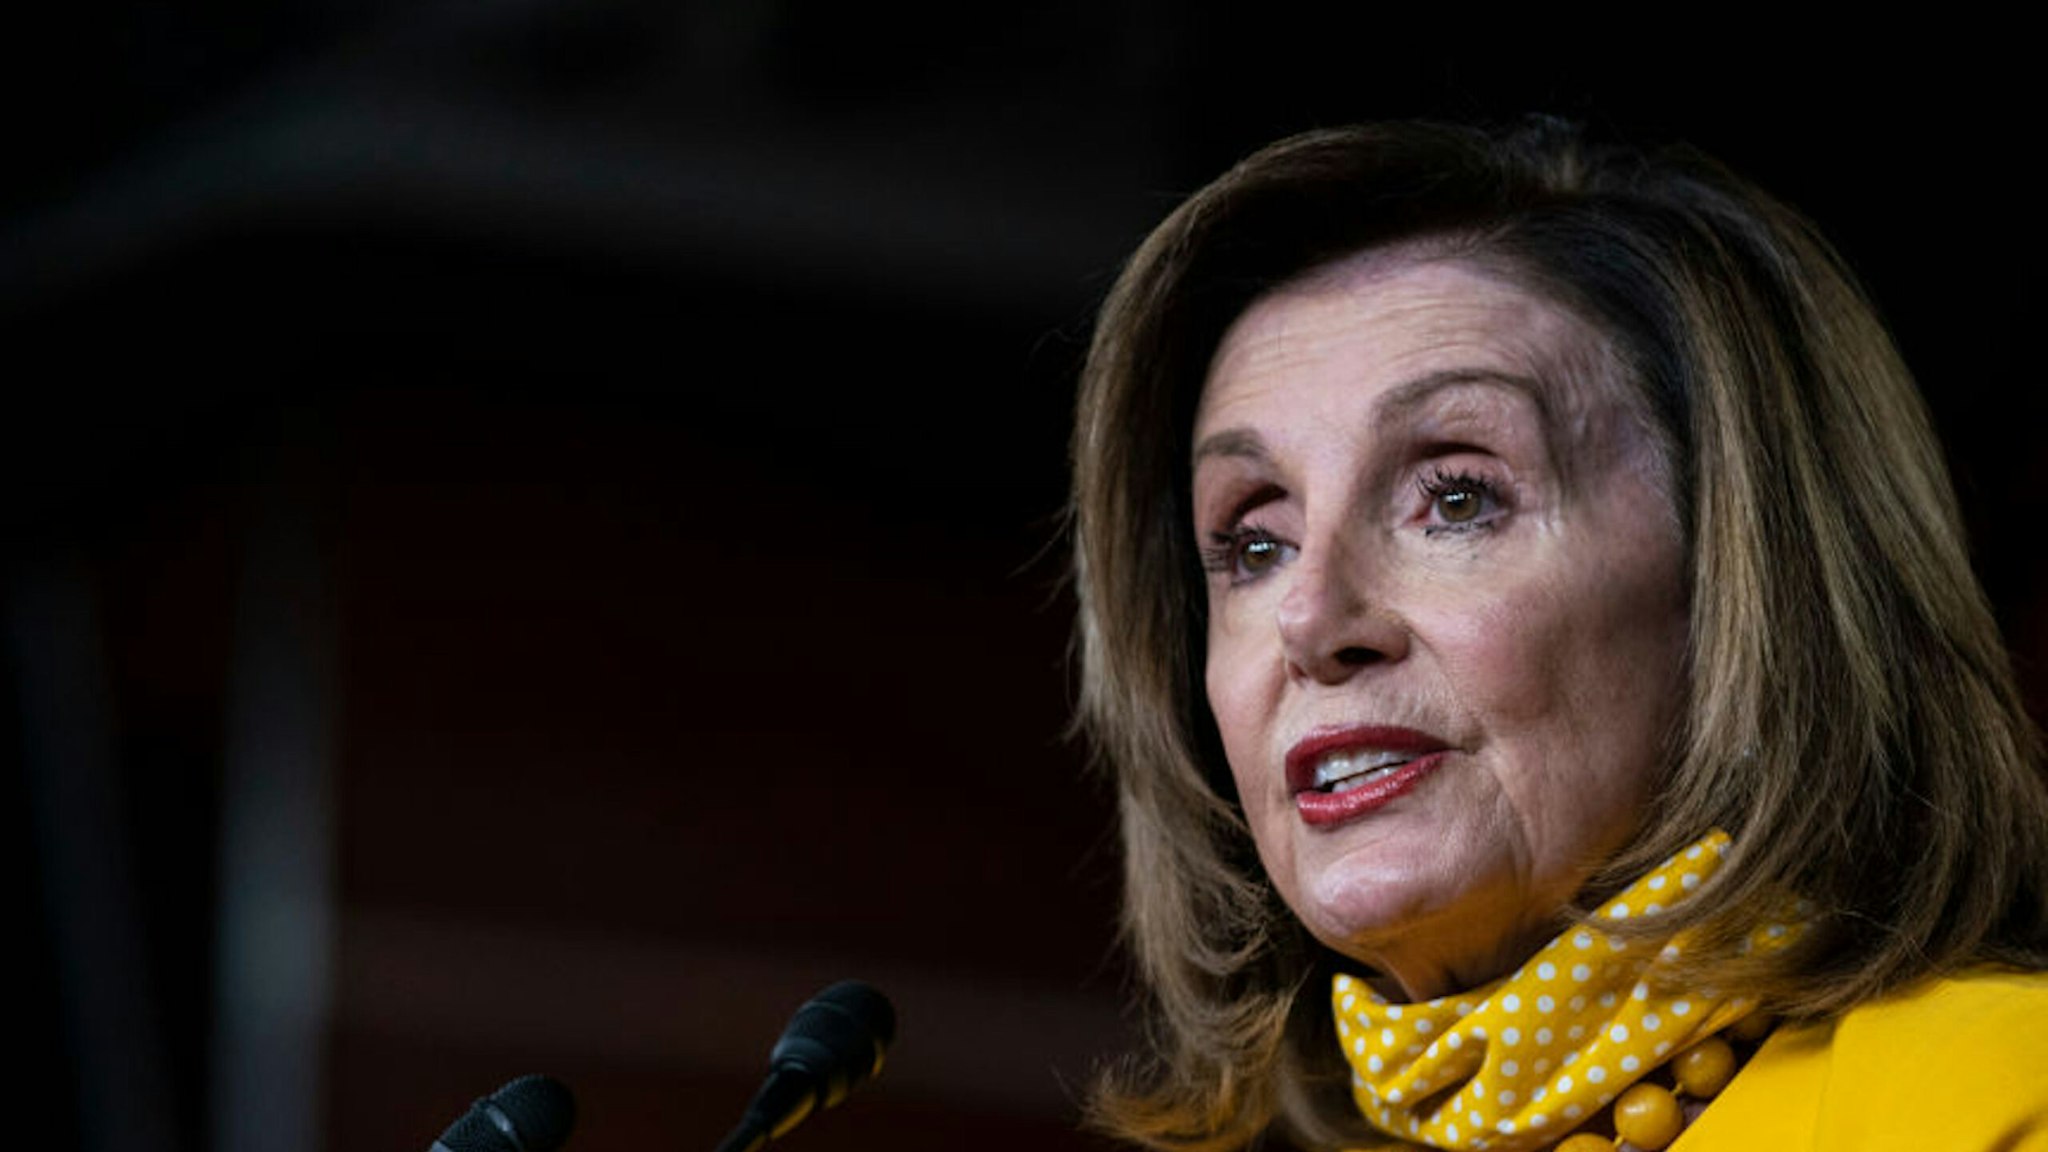 WASHINGTON, DC - JUNE 11: U.S. Speaker of the House Rep. Nancy Pelosi (D-CA) speaks during a weekly news conference on June 11, 2020 in Washington, DC. Speaker Pelosi discussed various topics including the Black Lives Matter movement and coronavirus.